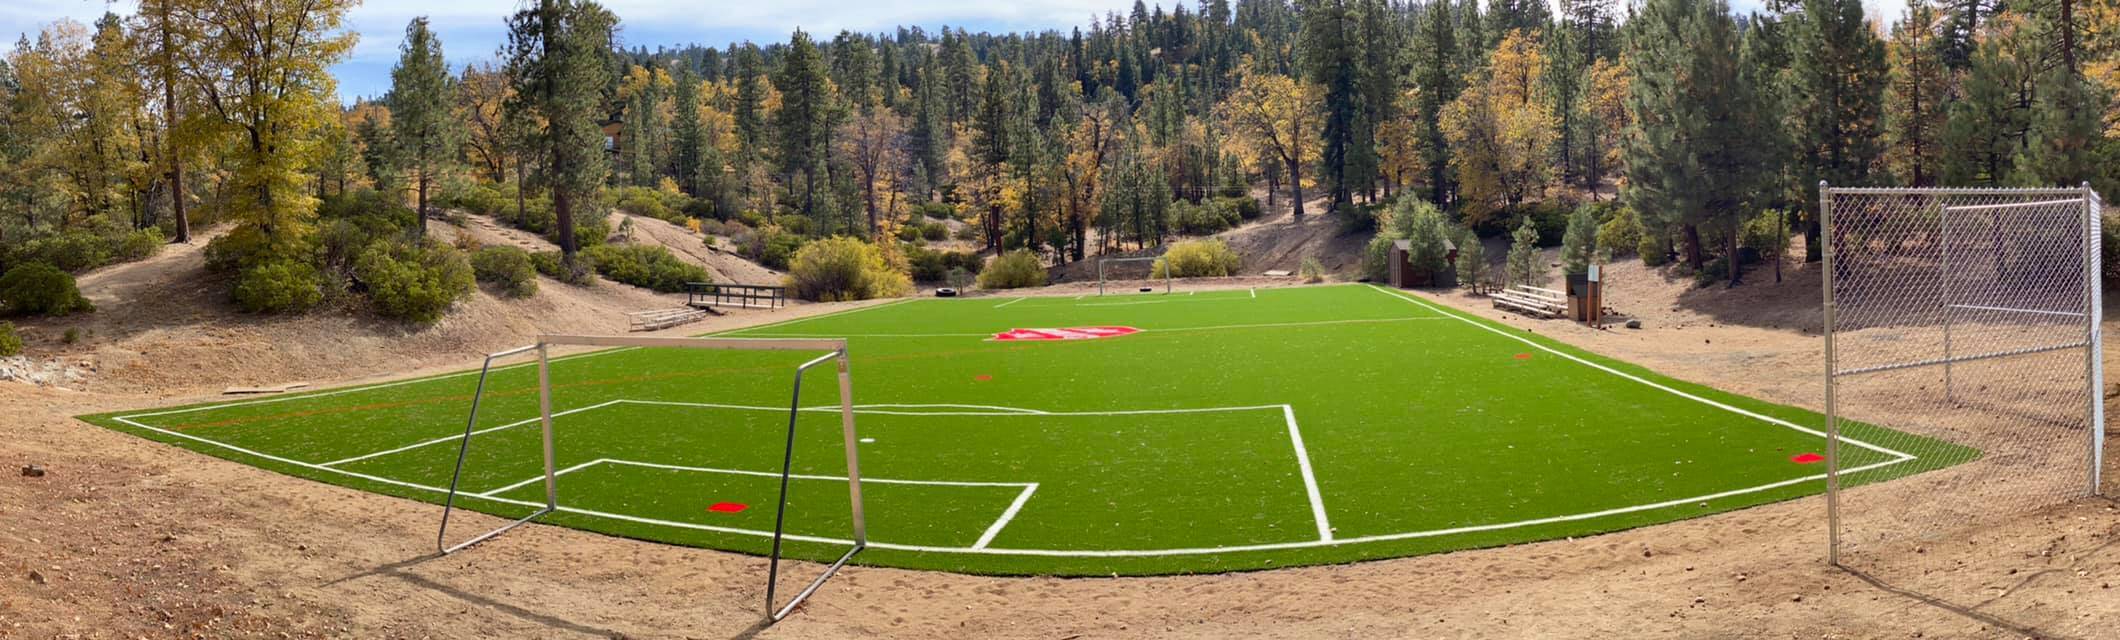 Artificial Sports Turf for gyms, stadiums, schools, & more Inland Empire